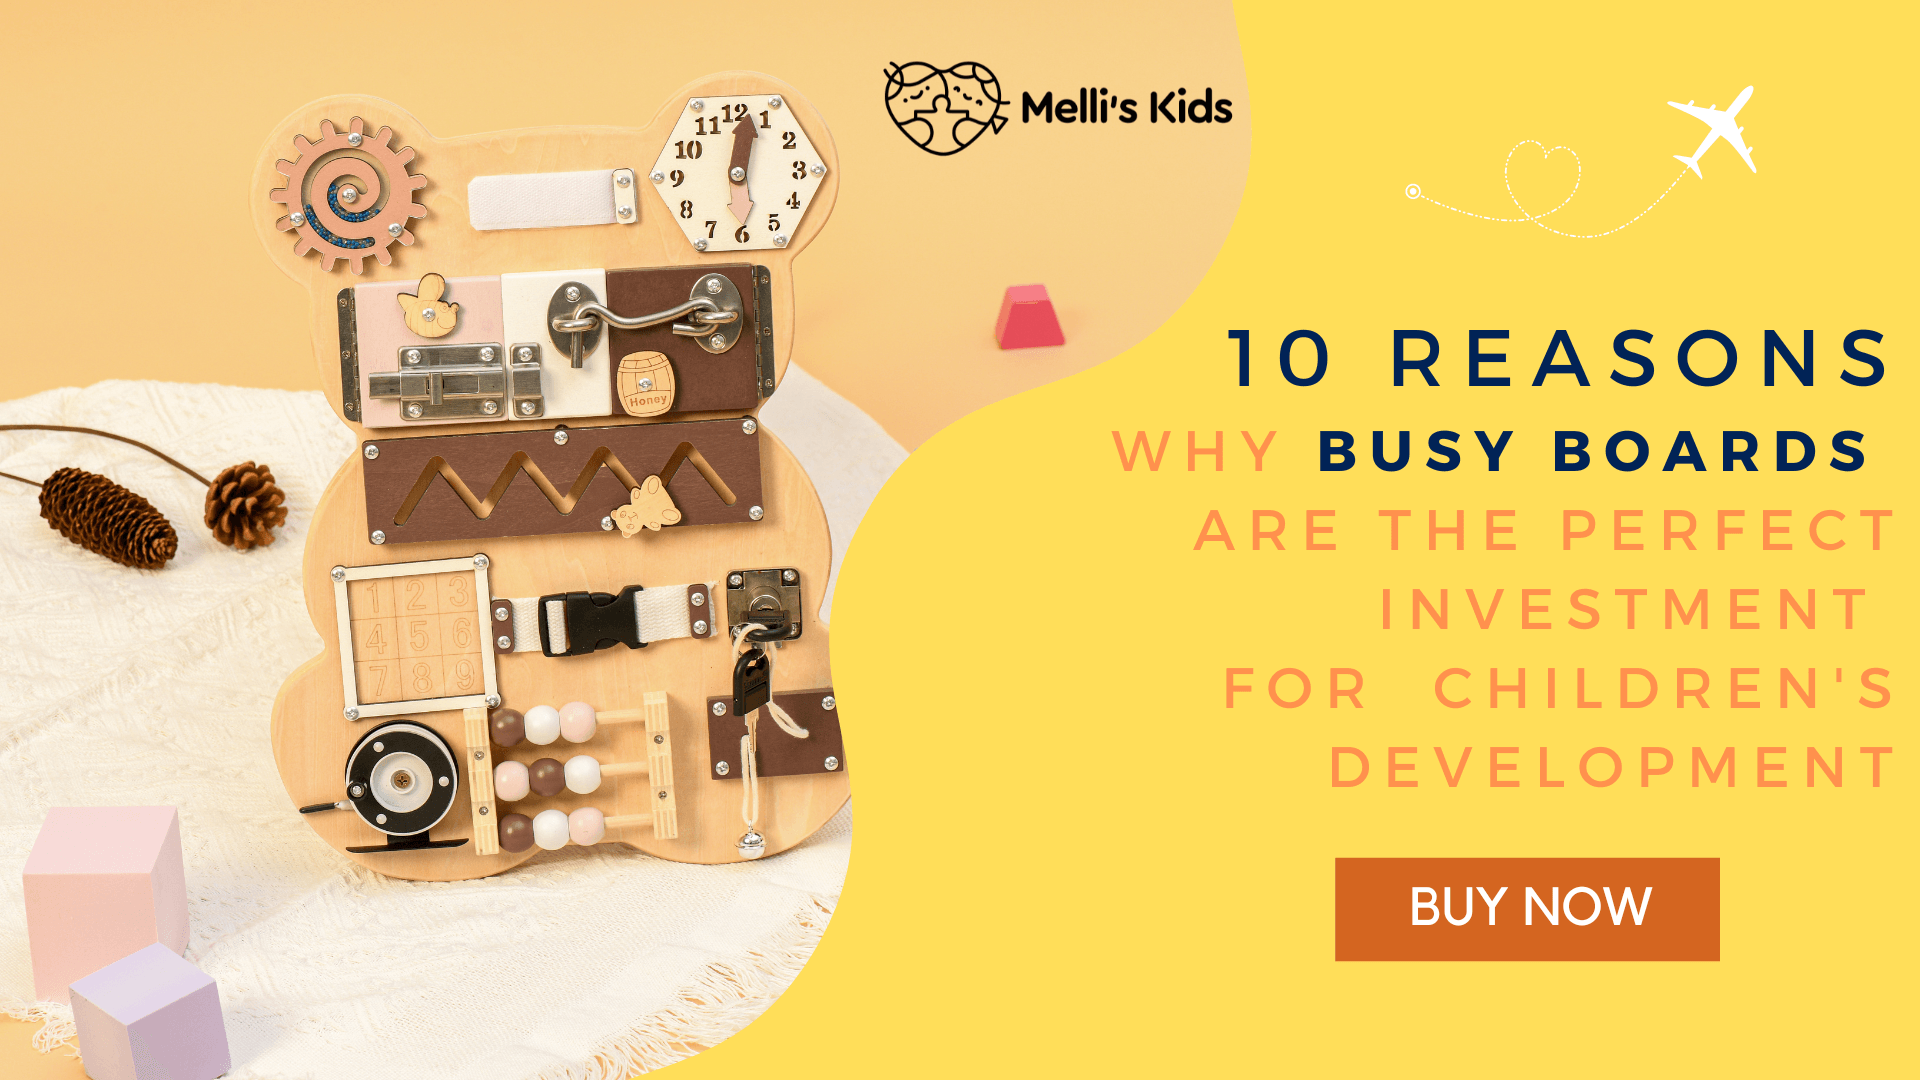 10 Reasons Why Busy Boards are the Perfect Investment for Your Child's Development - Melli's Kids